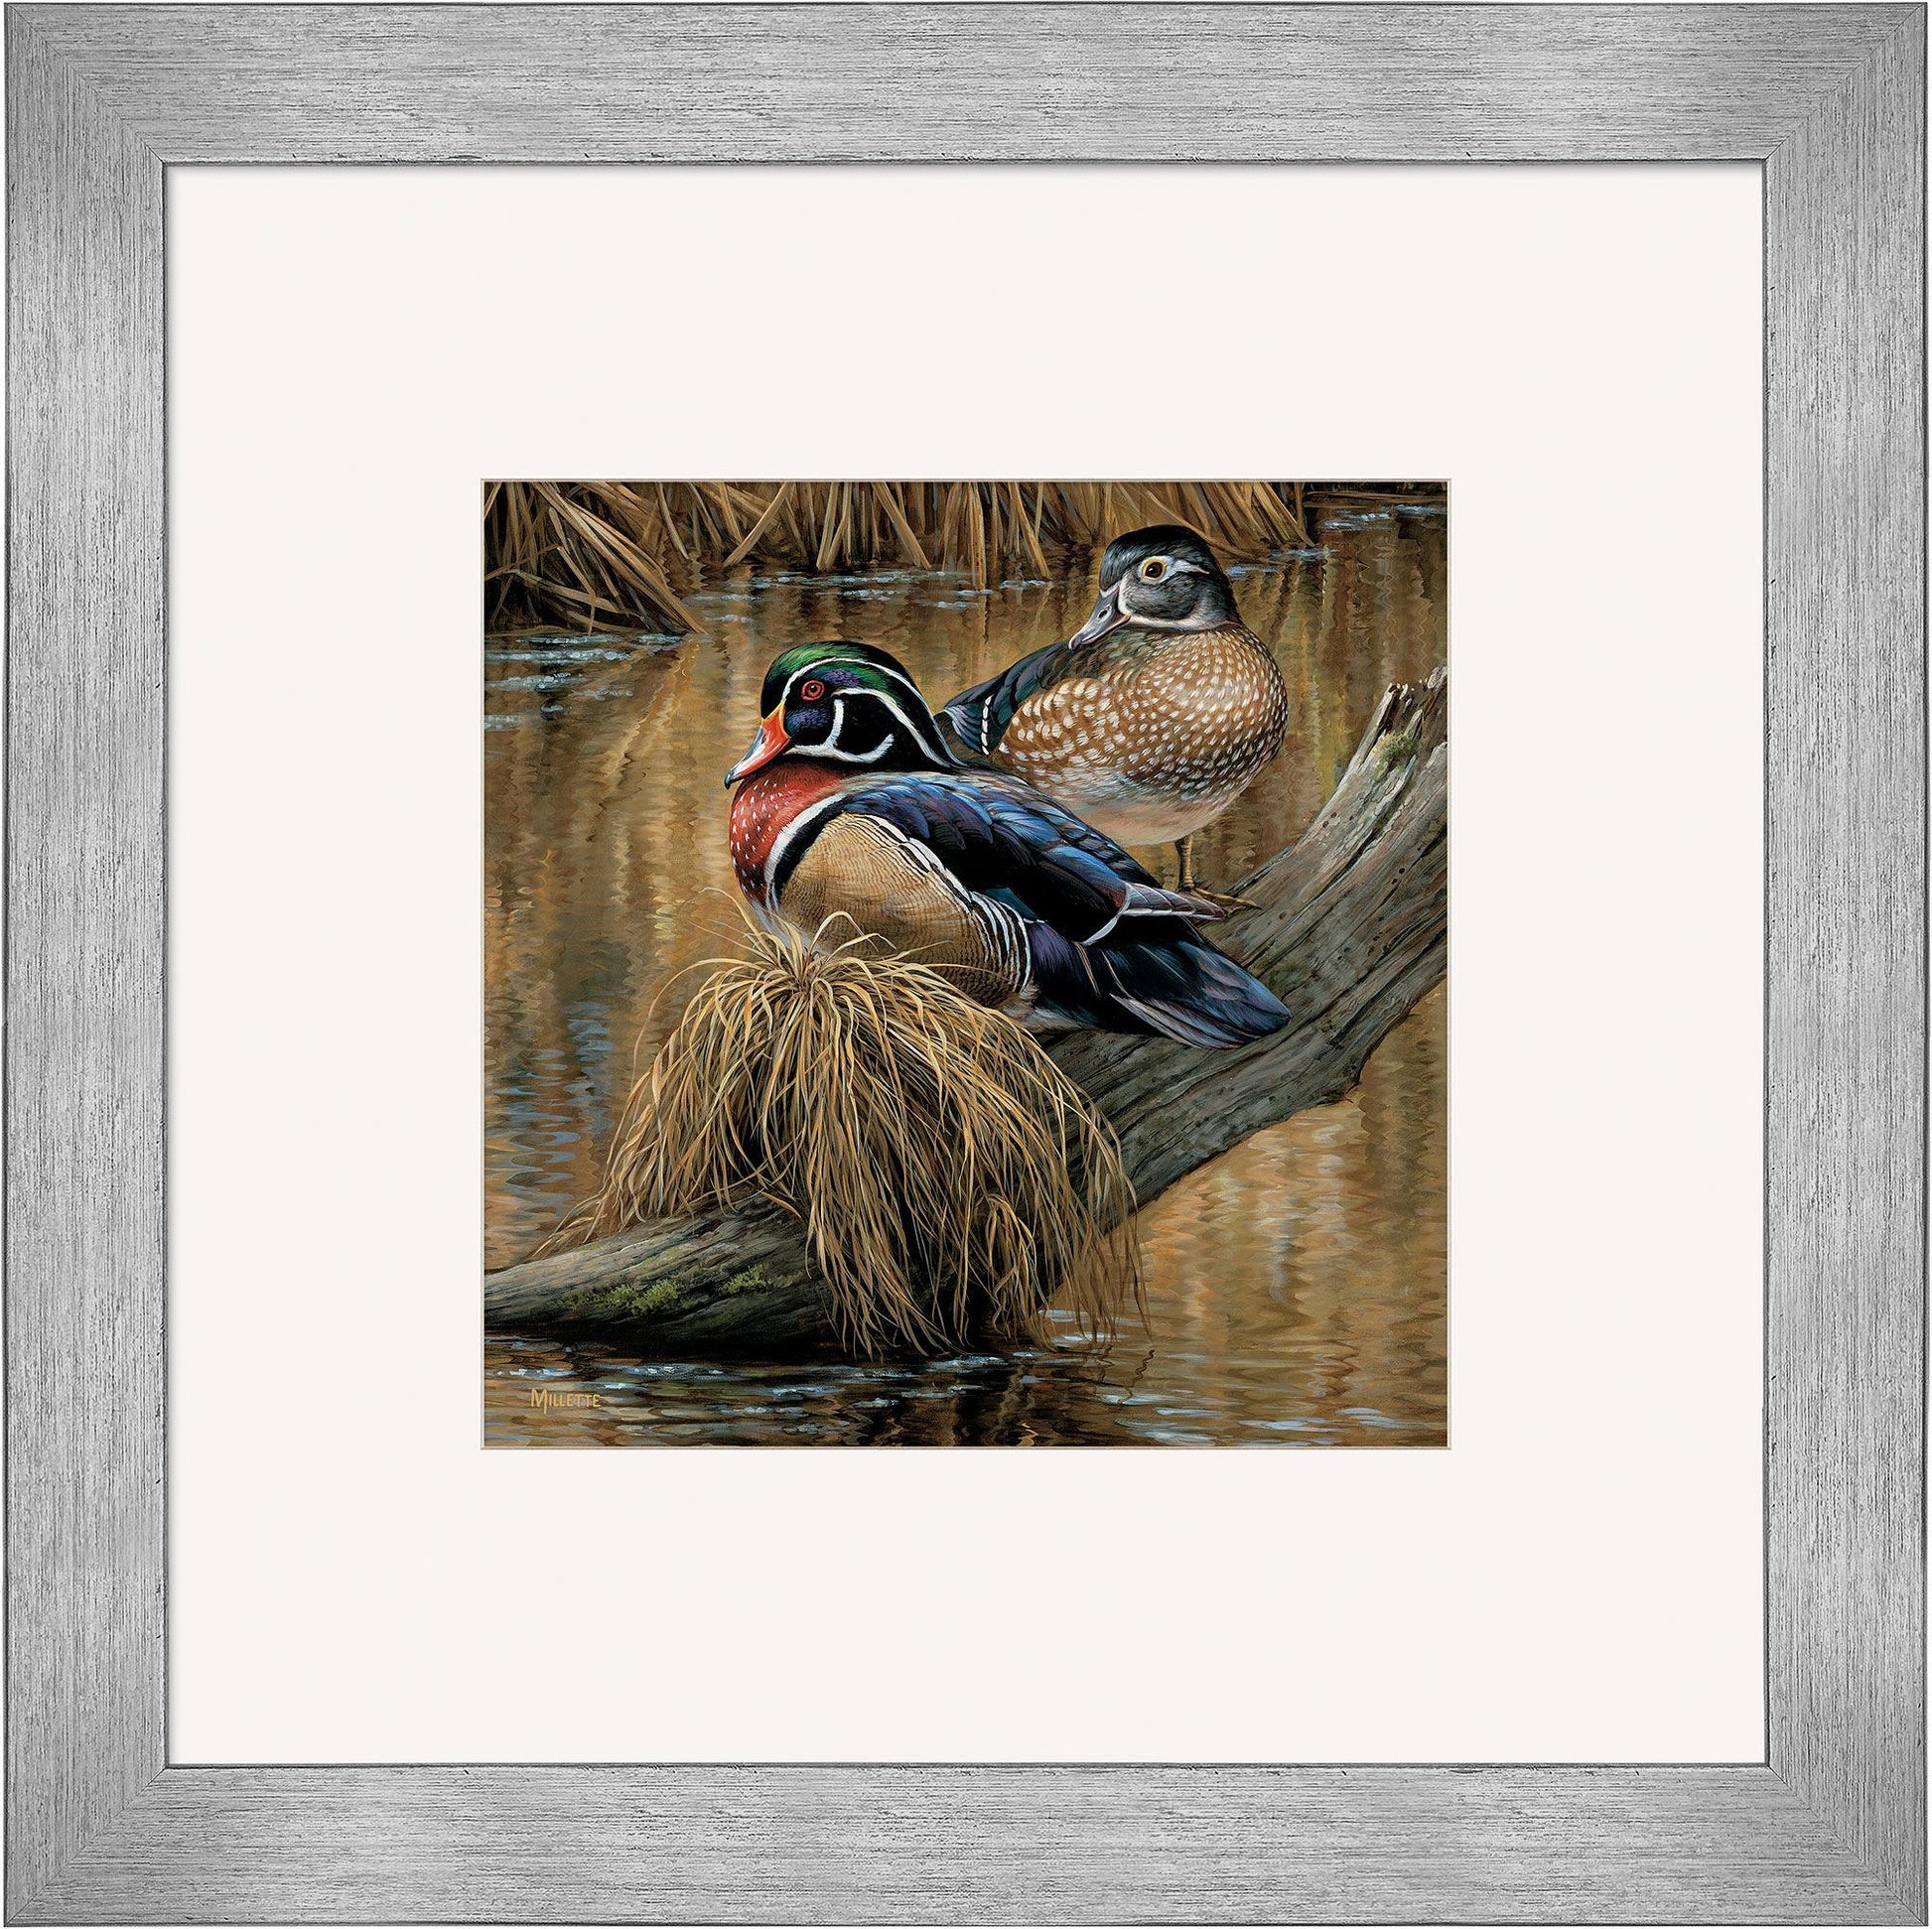 Backwater—Wood Ducks Contempo Square - Wild Wings